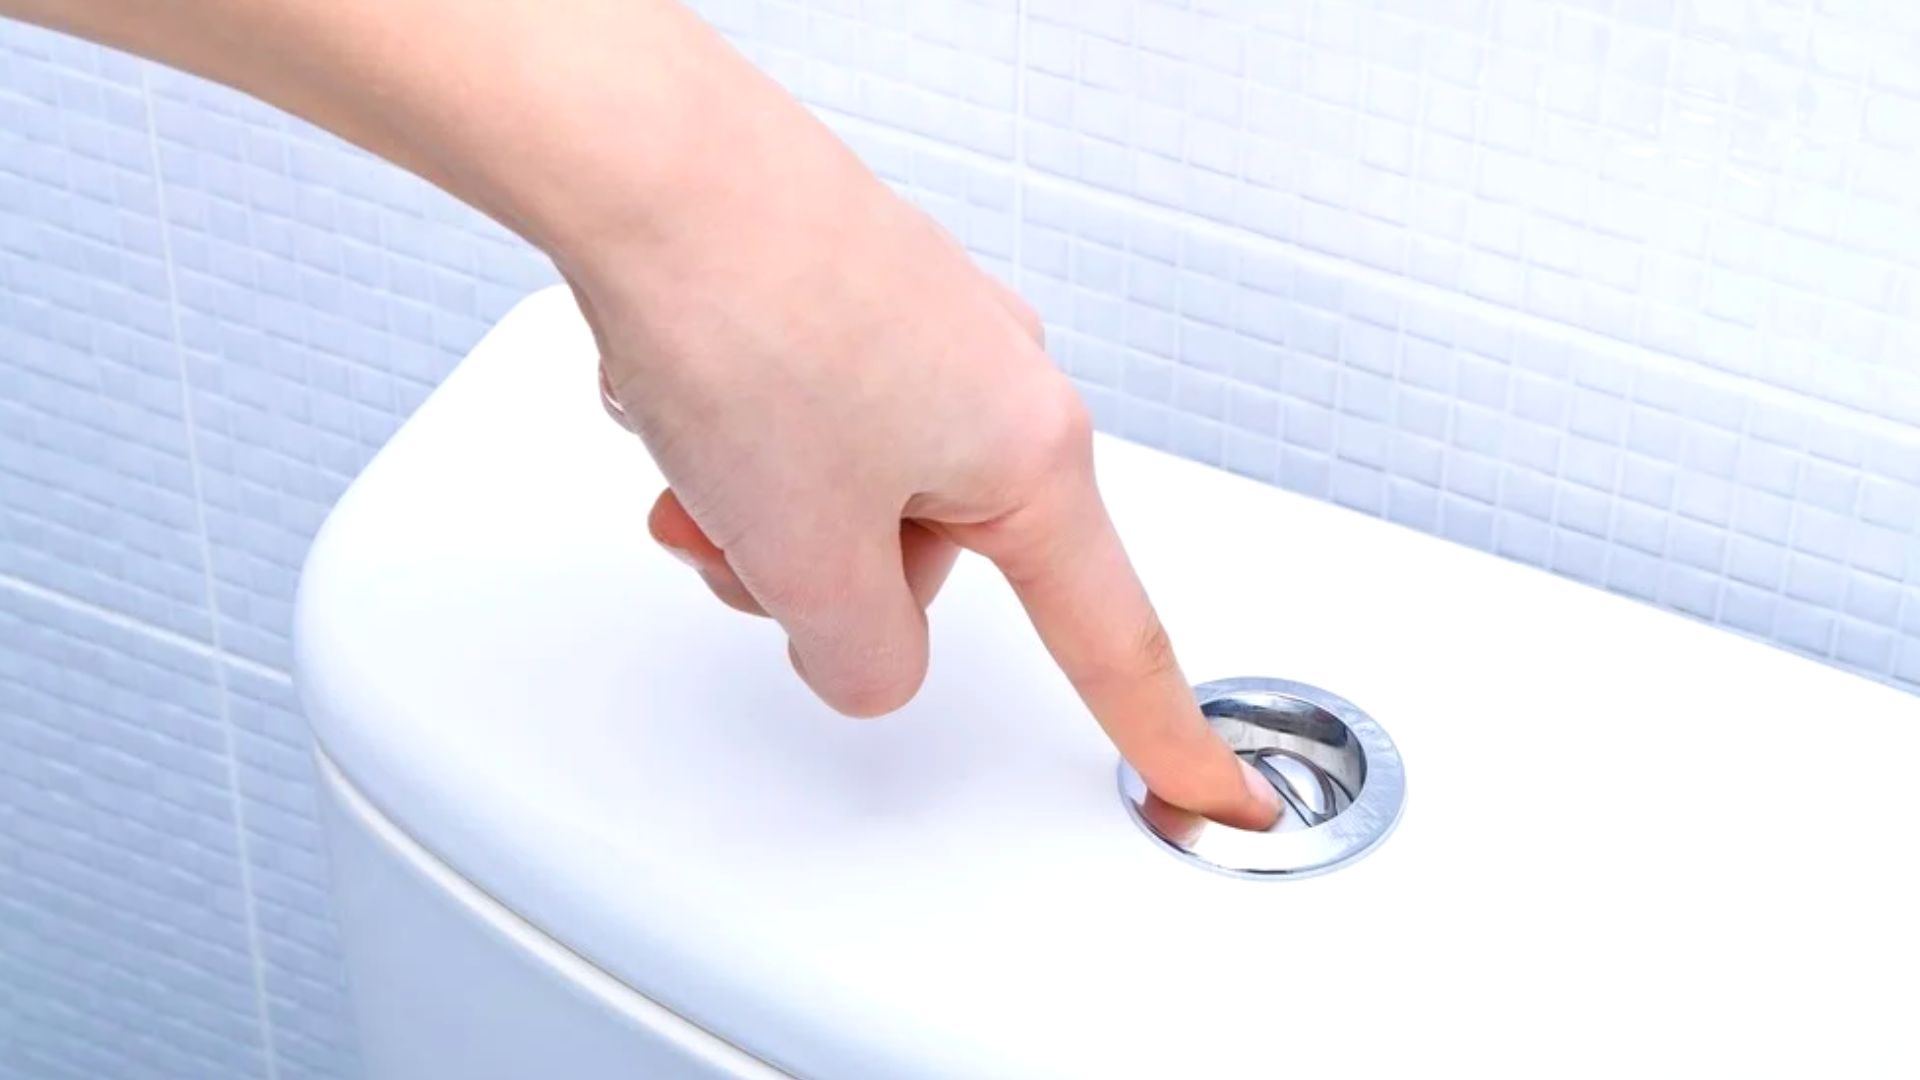 Person Pressing Flush Button On Top Of Toilet